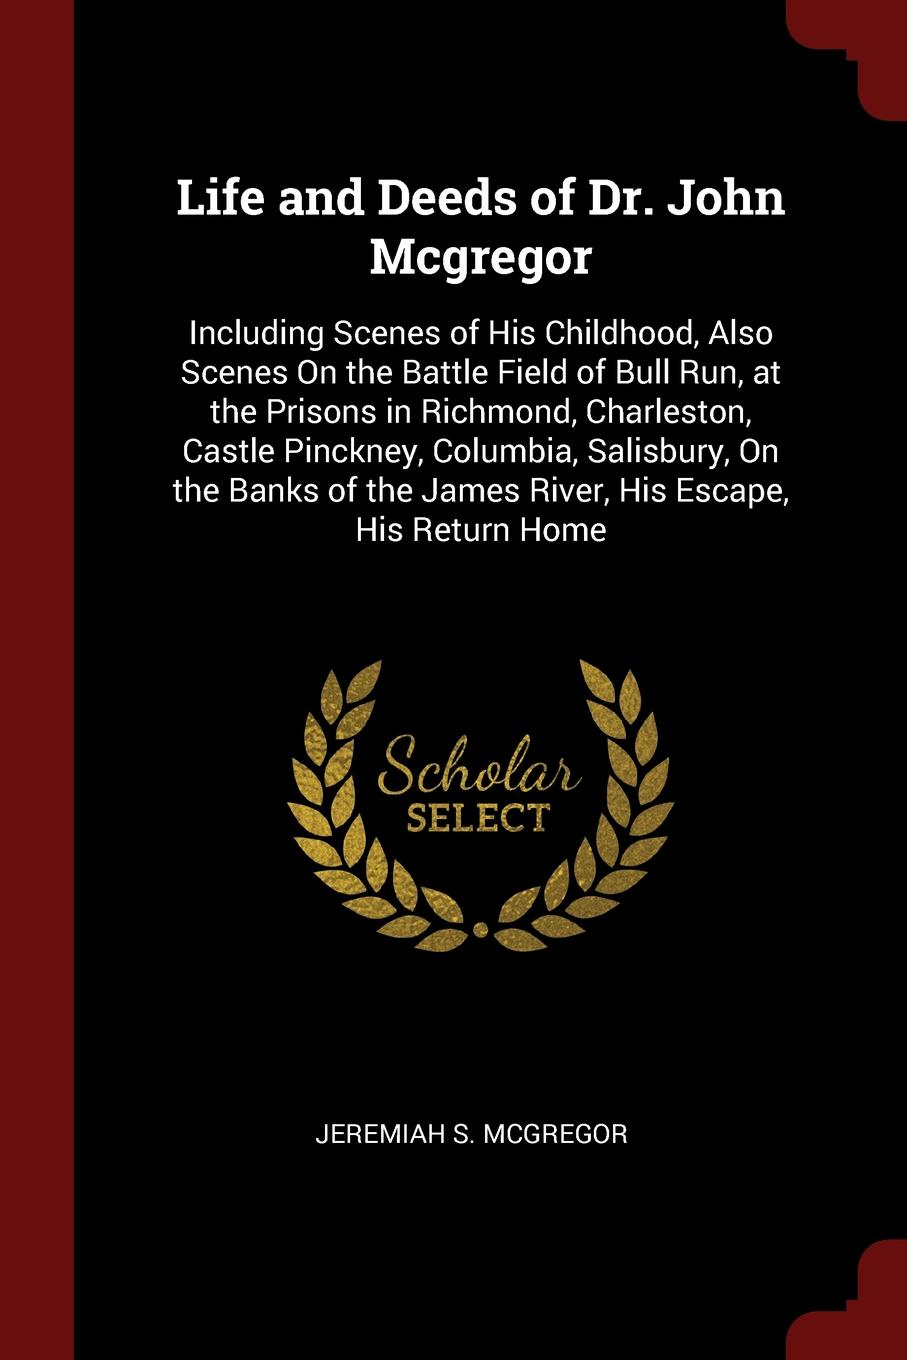 Life and Deeds of Dr. John Mcgregor. Including Scenes of His Childhood, Also Scenes On the Battle Field of Bull Run, at the Prisons in Richmond, Charleston, Castle Pinckney, Columbia, Salisbury, On the Banks of the James River, His Escape, His Ret...